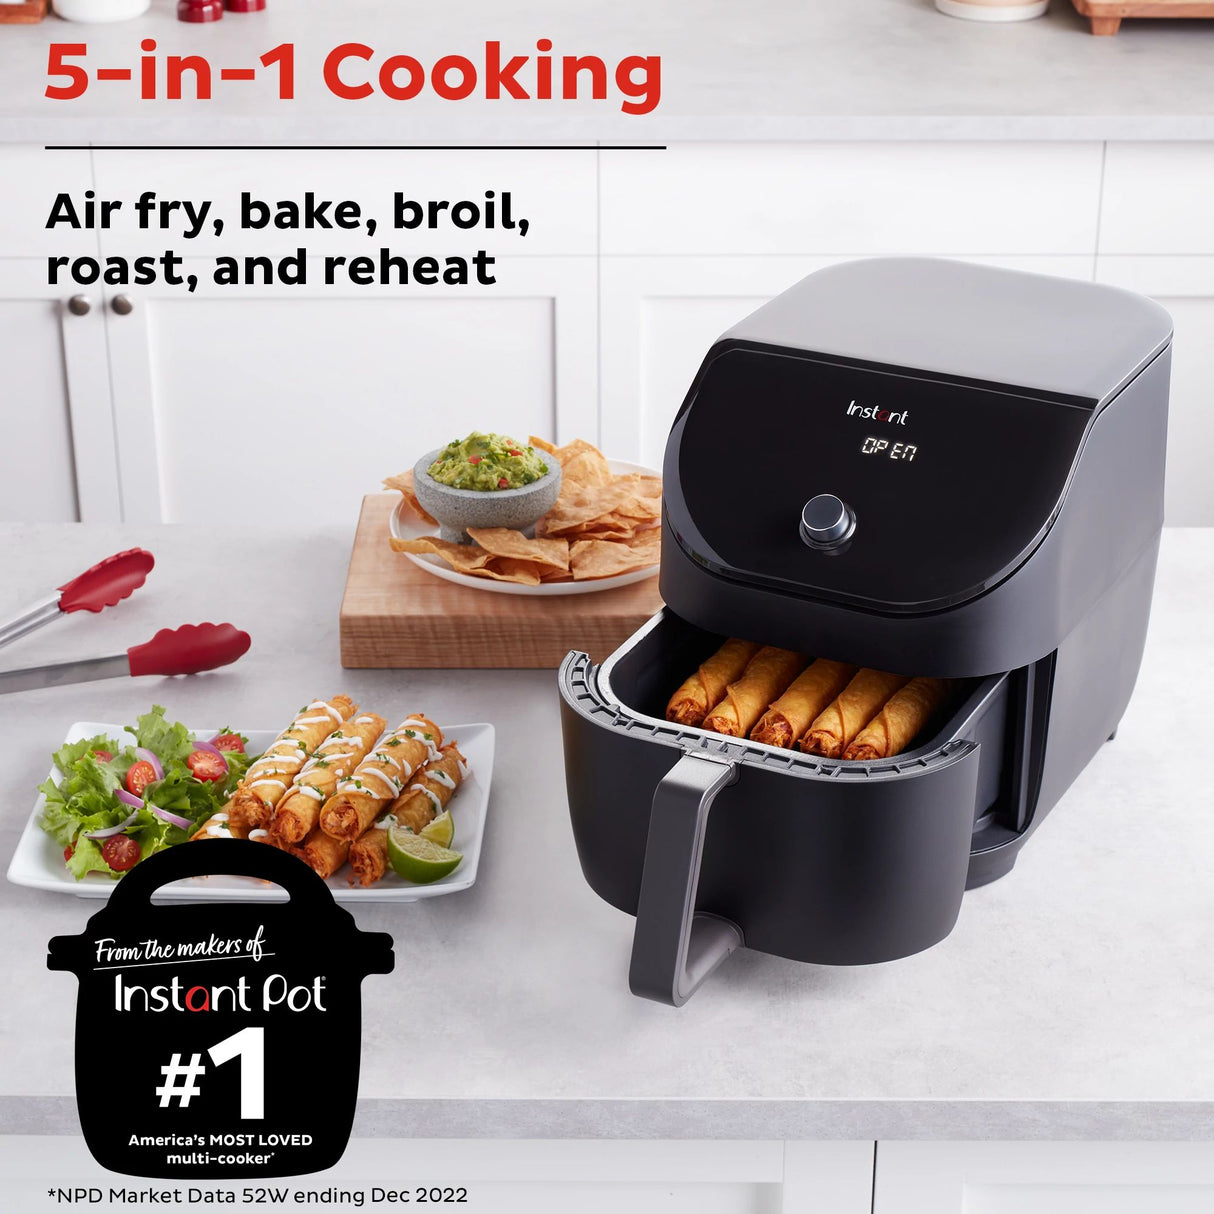  Instant Vortex Slim 6-quart Air Fryer with text 5-in-1 cooking and Instant Pot #1 America's Most Loved Multicooker